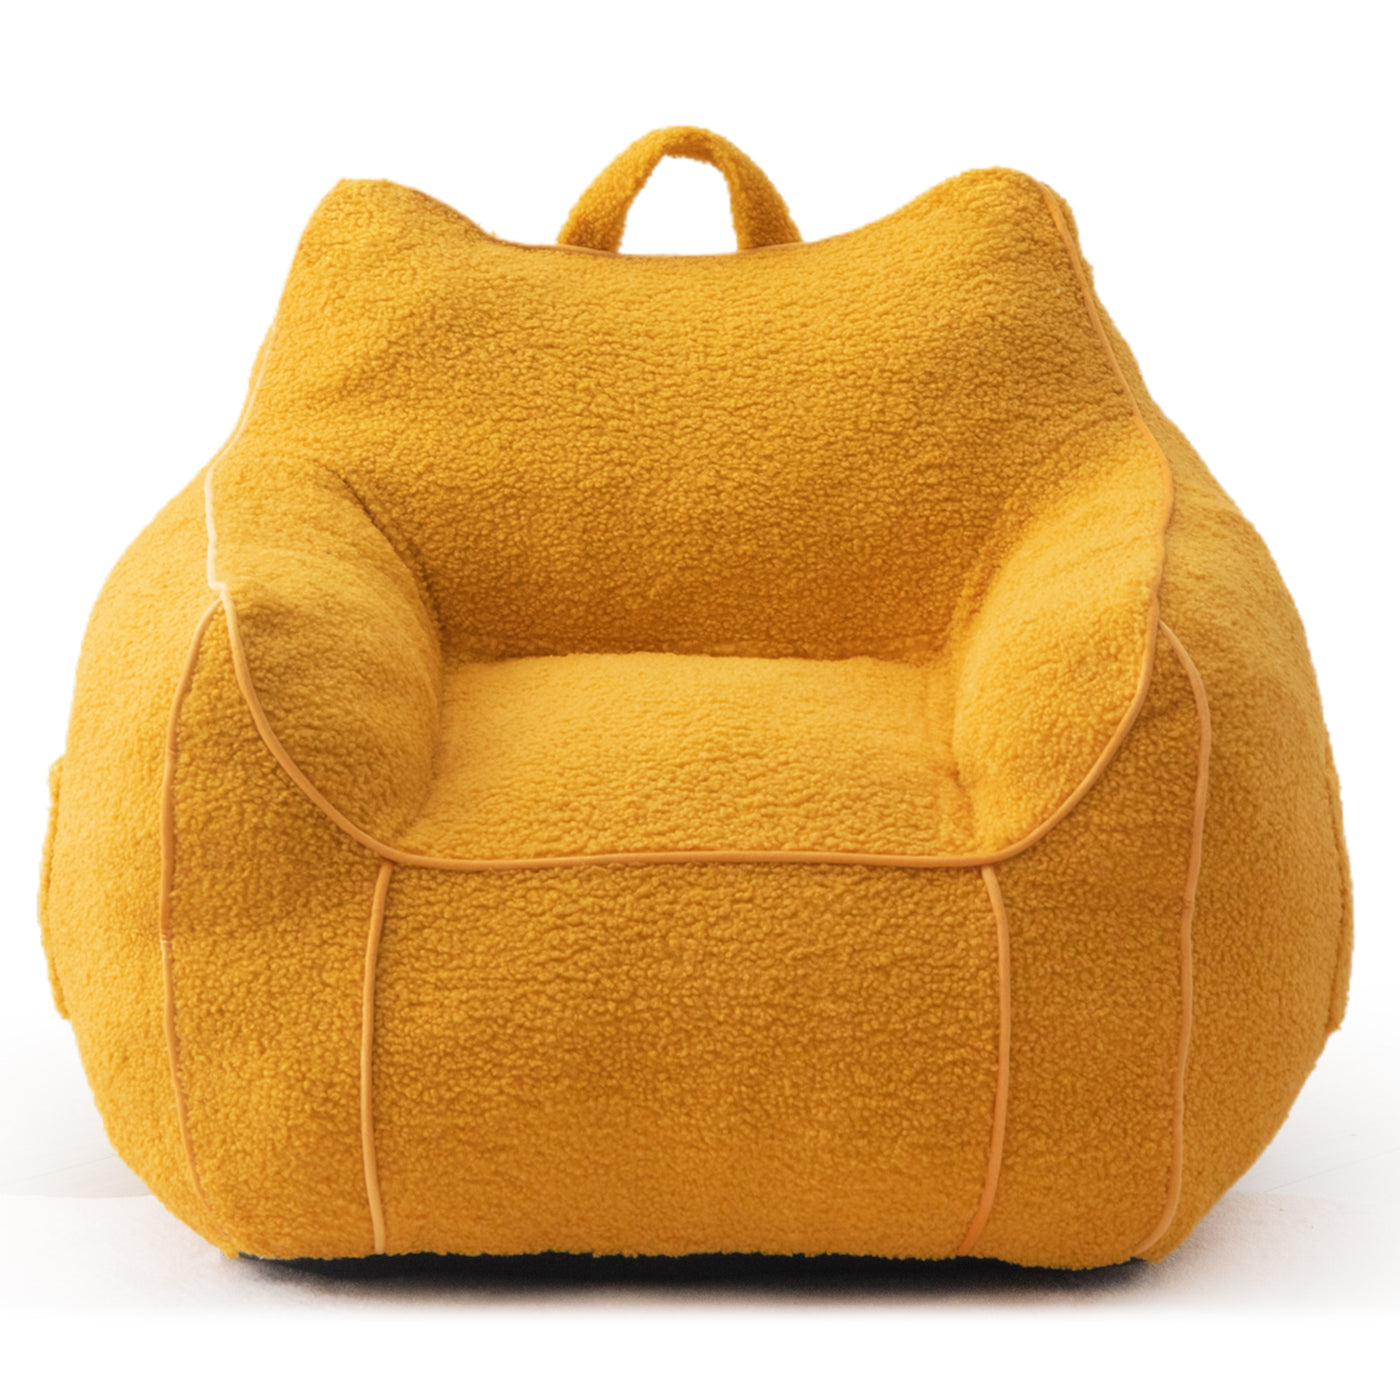 MAXYOYO Kids Bean Bag Chair, Sherpa Bean Bag Couch with Decorative Edges for children's room (Lemon Yellow)